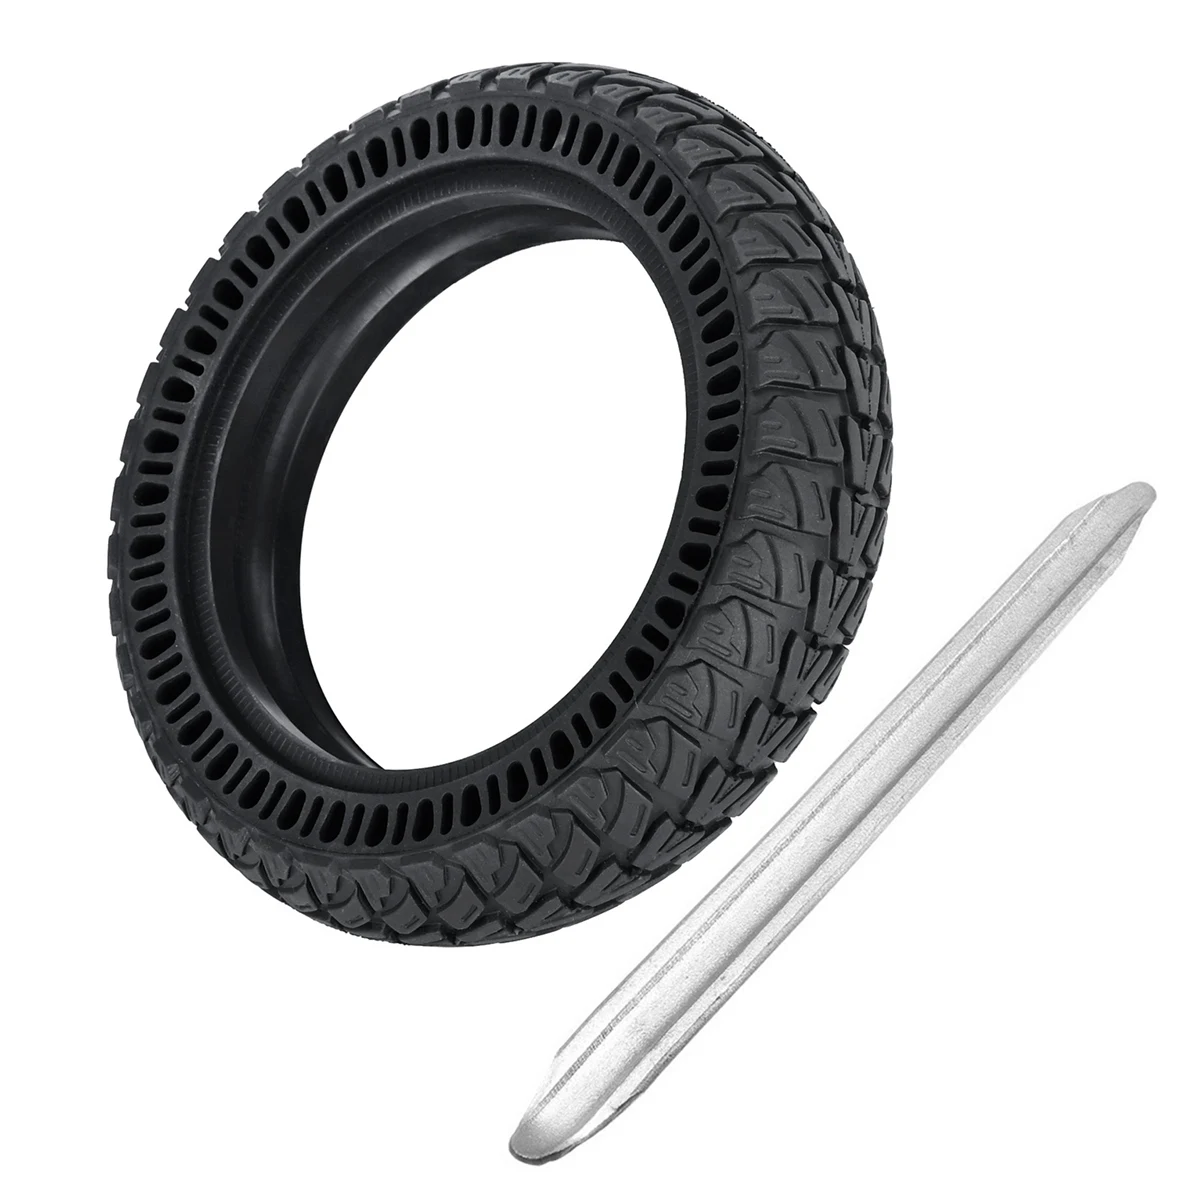 

1PCS Upgrade Damping Solid Tire for Xiaomi M365 for Gotrax XR/M365 Pro 8.5 Inches Solid Honeycomb Shock Tires W/Crowbar